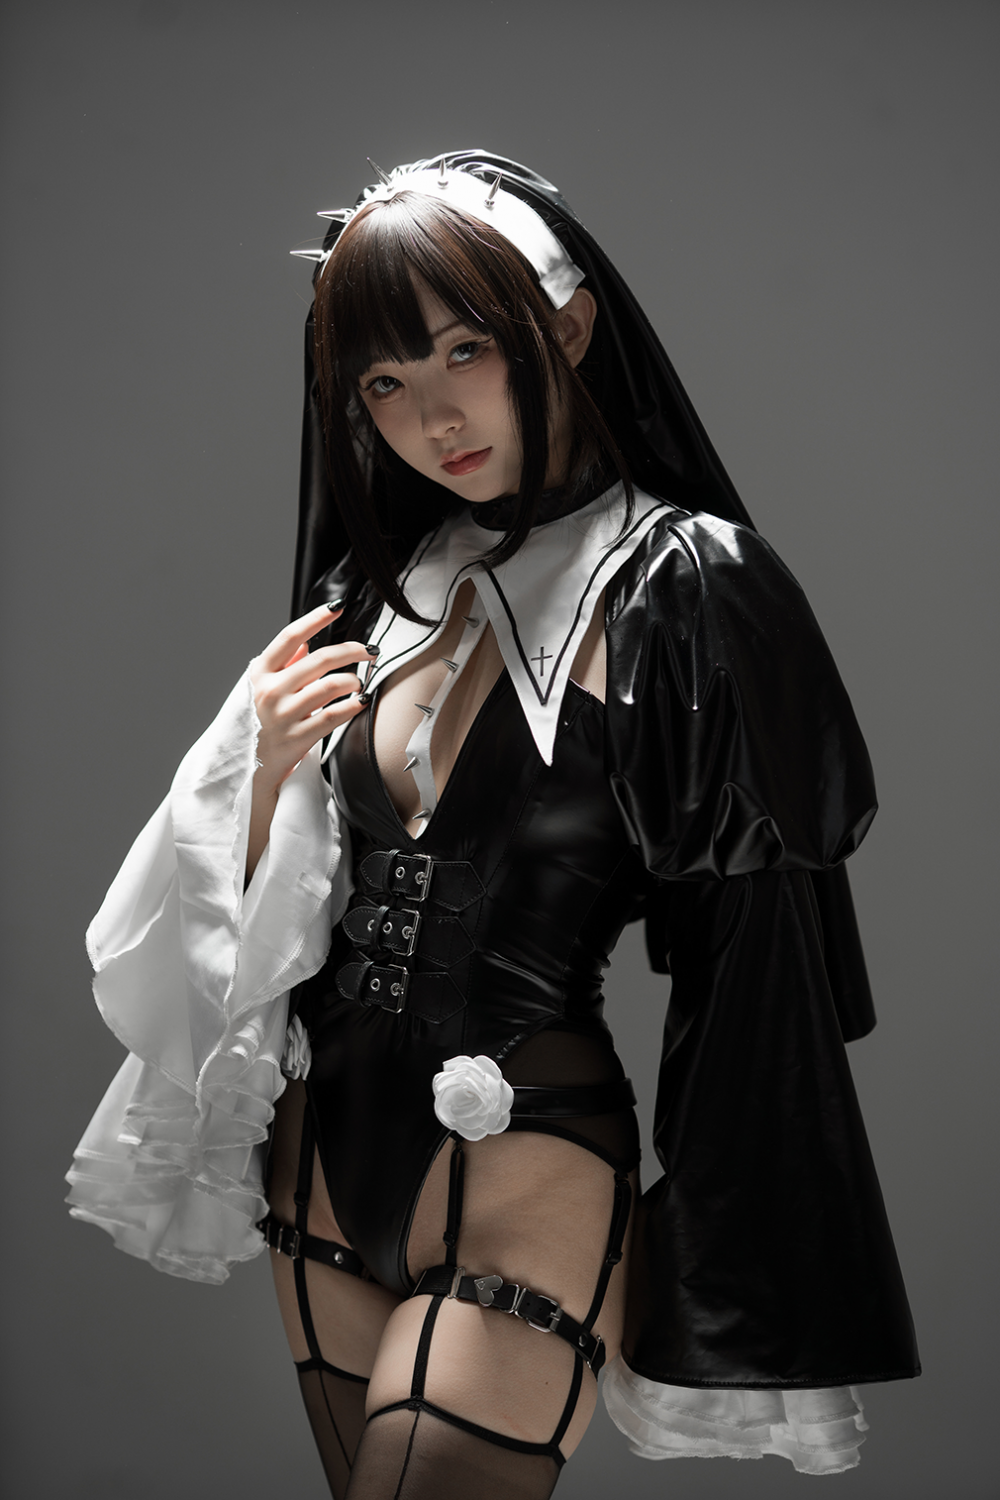 Cosplay Lingerie Porn - Cosplay Anime Asian Girl with Hot Lingerie - Porn - EroMe